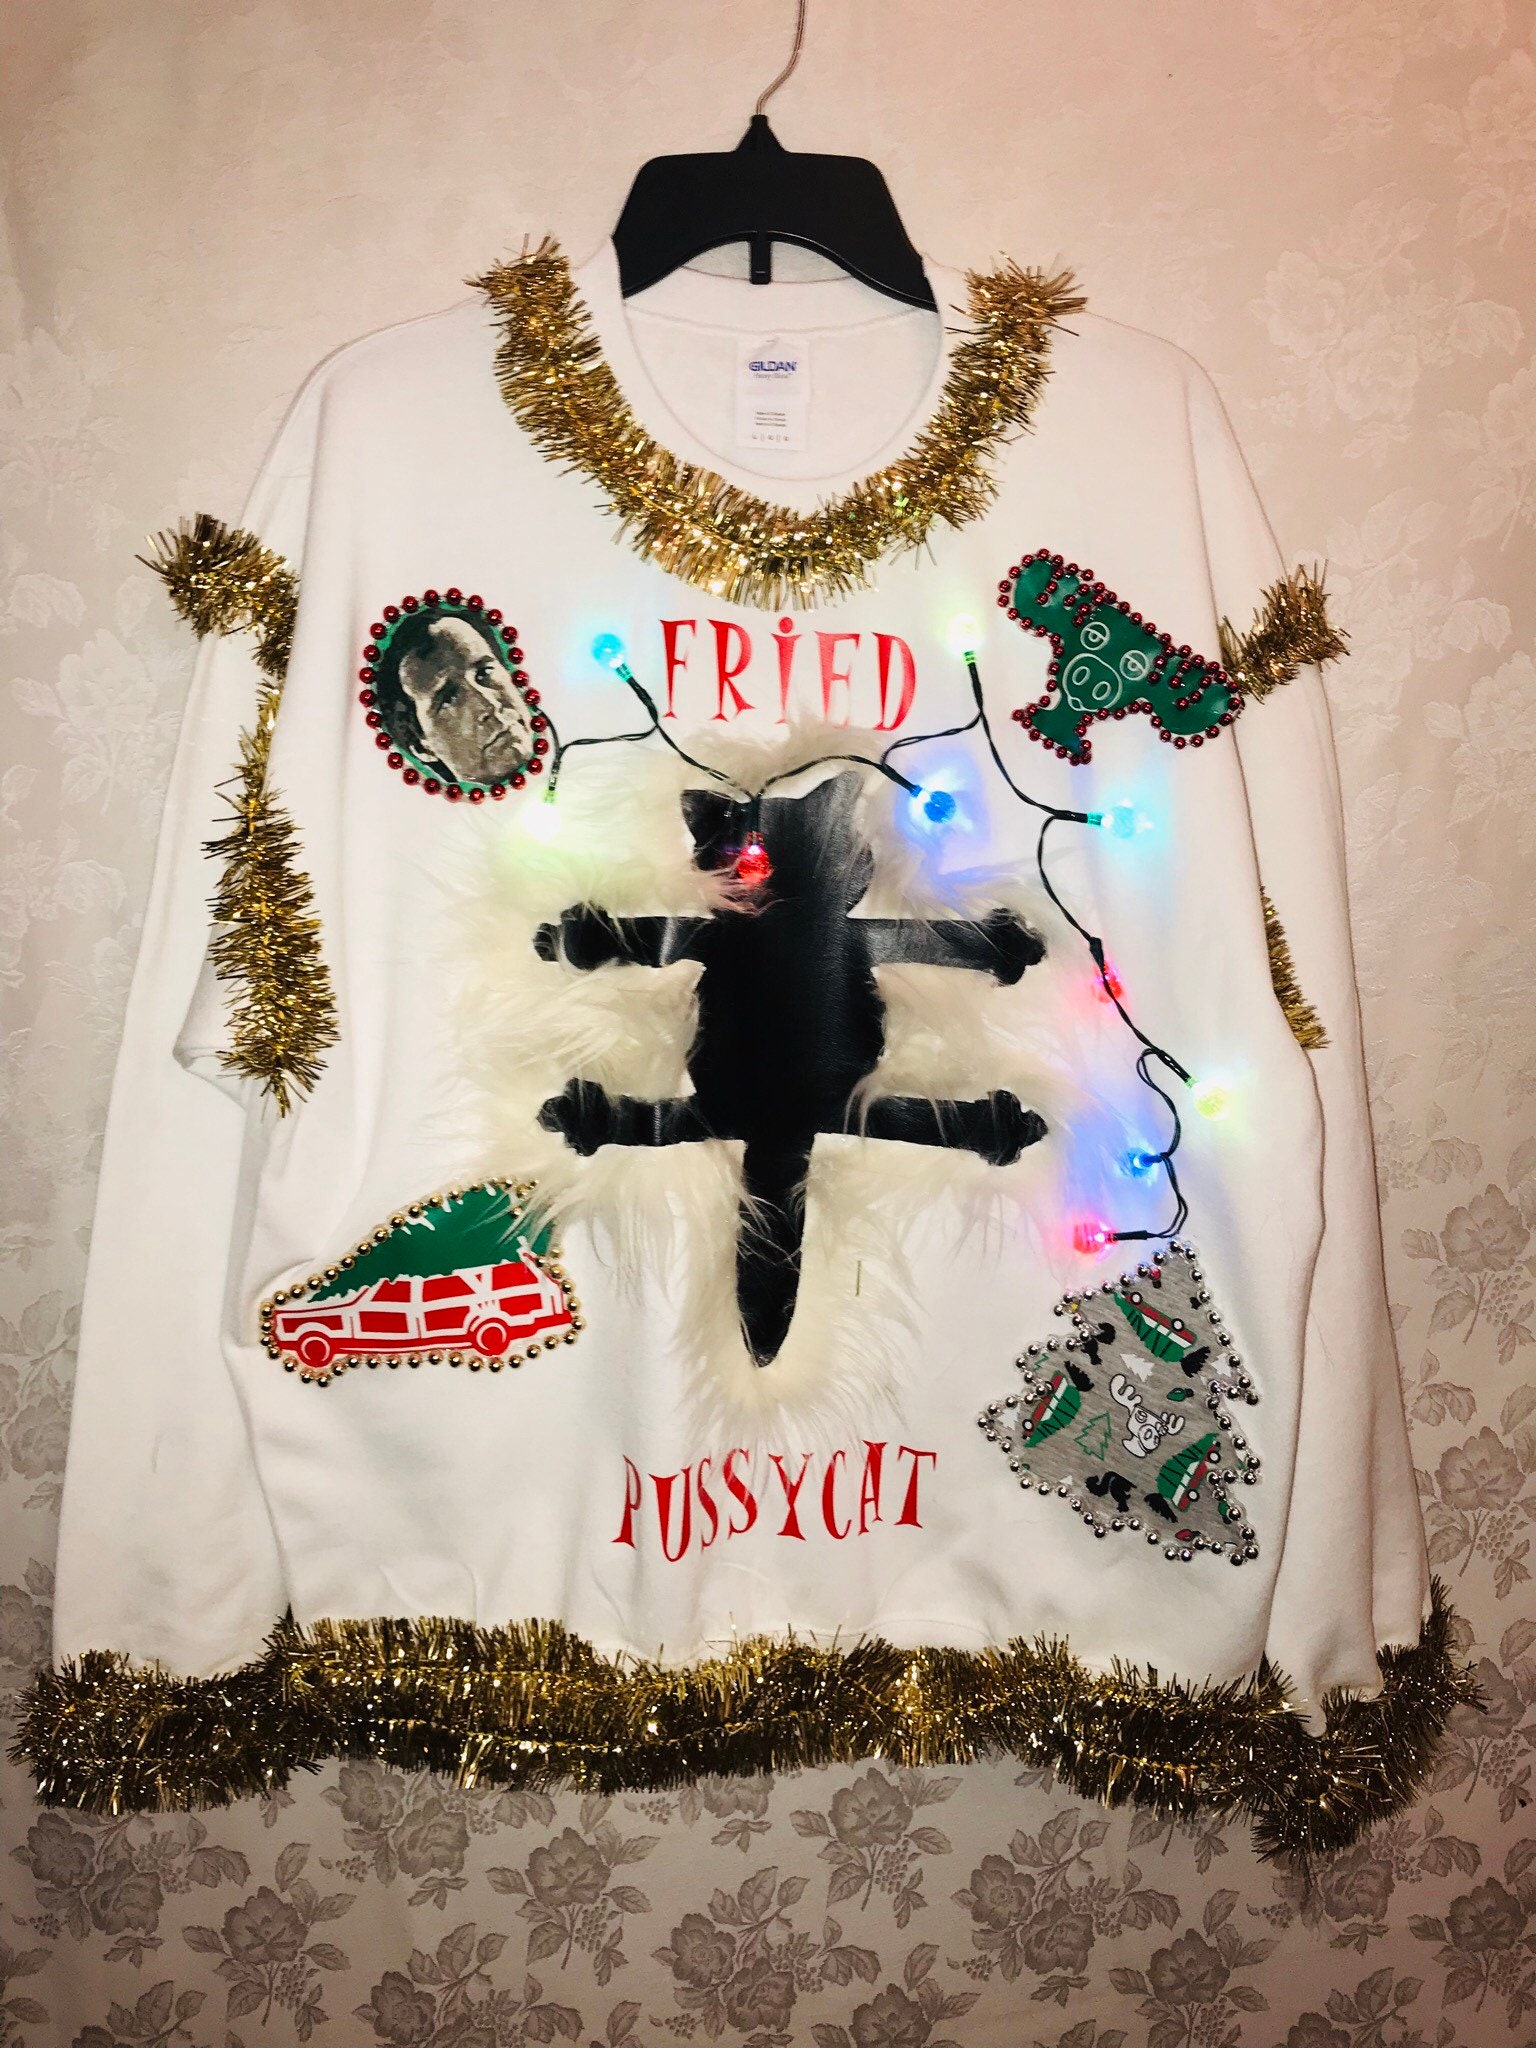 Christmas Vacation Ugly Christmas Sweater with LightsFried | Etsy